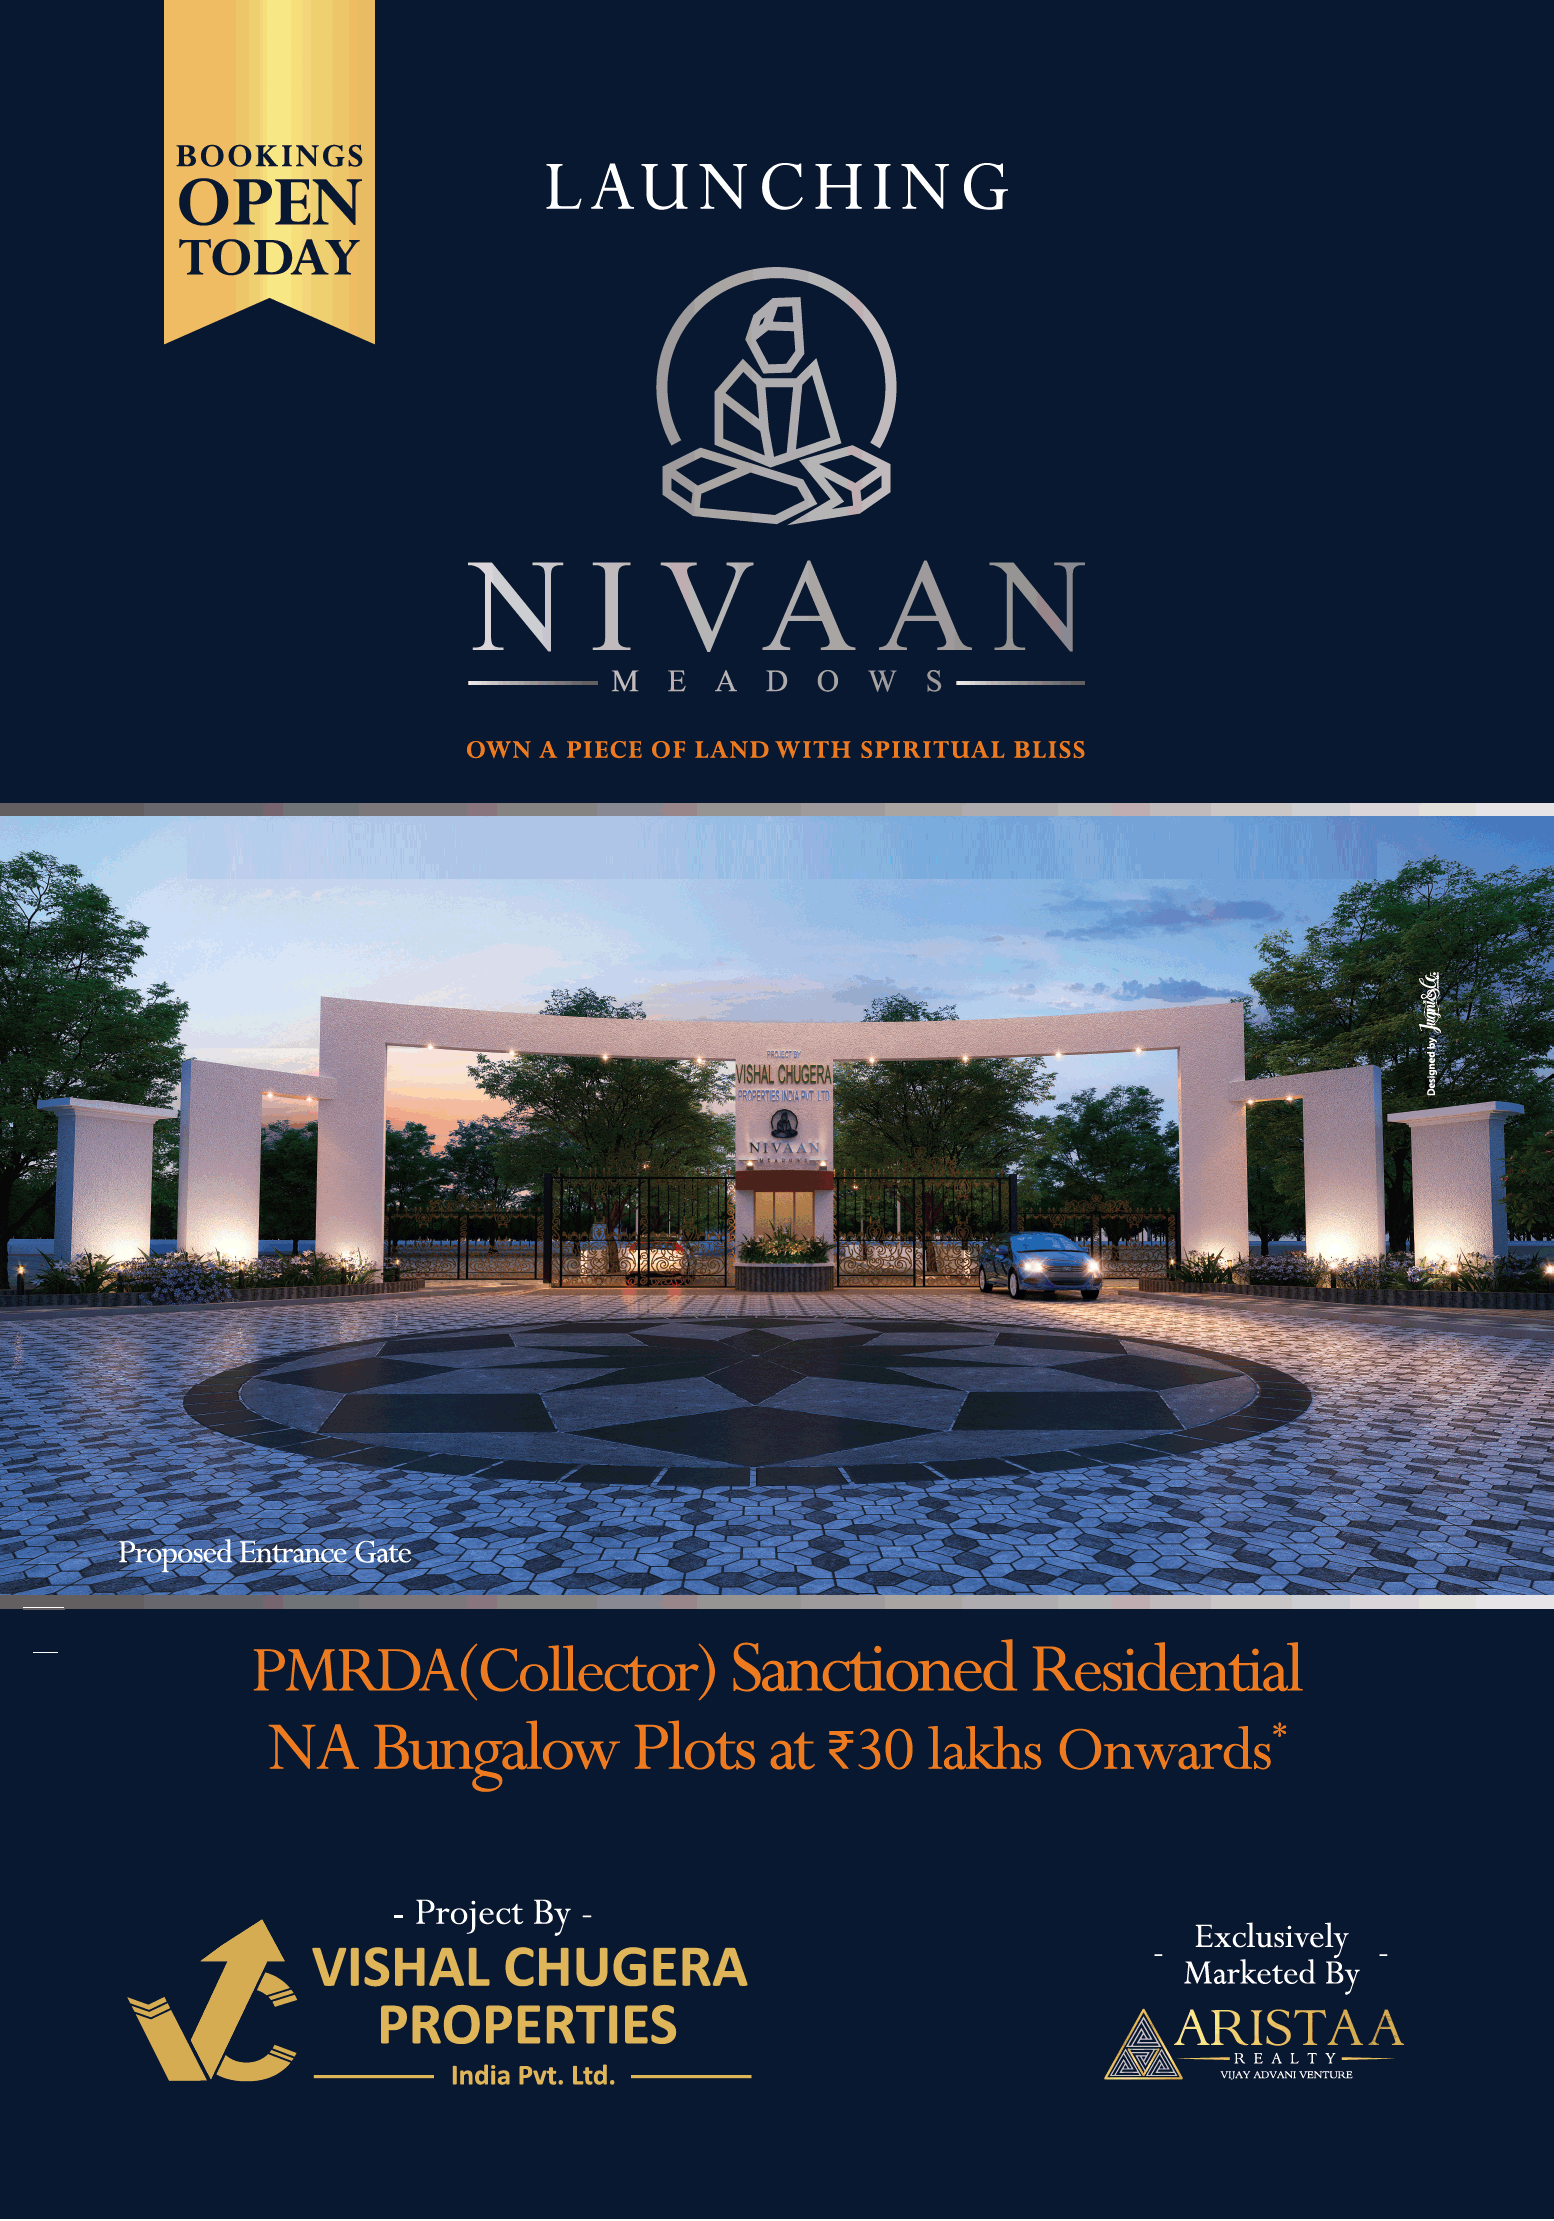 Launching Bungalow Plots at Rs. 30 lakhs at Nivaan Meadows in Wagholi, Pune